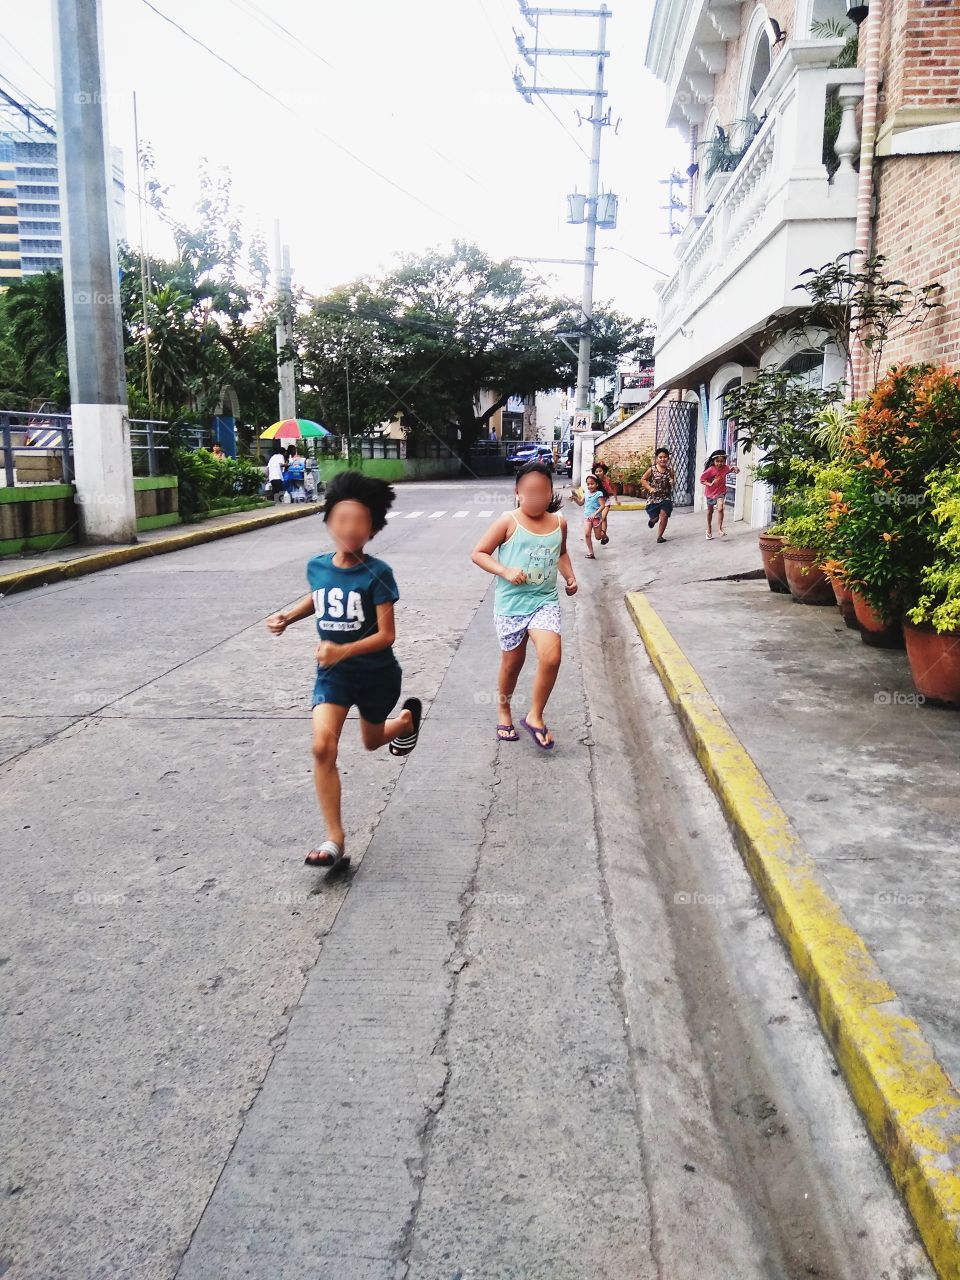 Running kids. They are so happy playing.I wish we could go back to that time. Childhood time is so fun. Happiness don't have to be expensive.